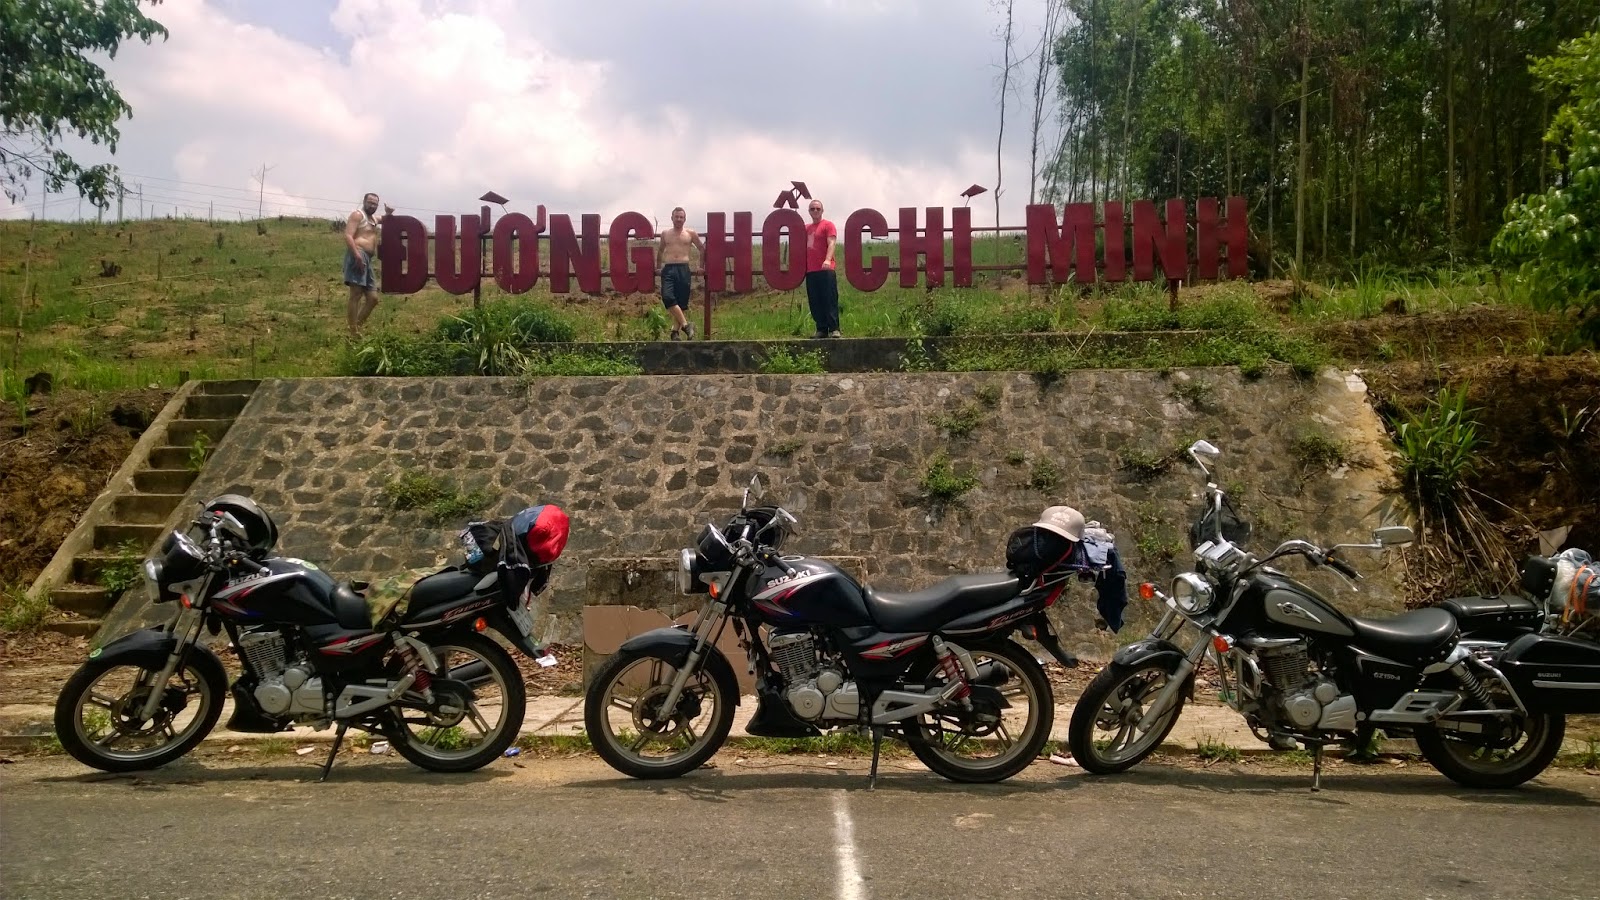 Review of Ho Chi Minh trail by motorbike